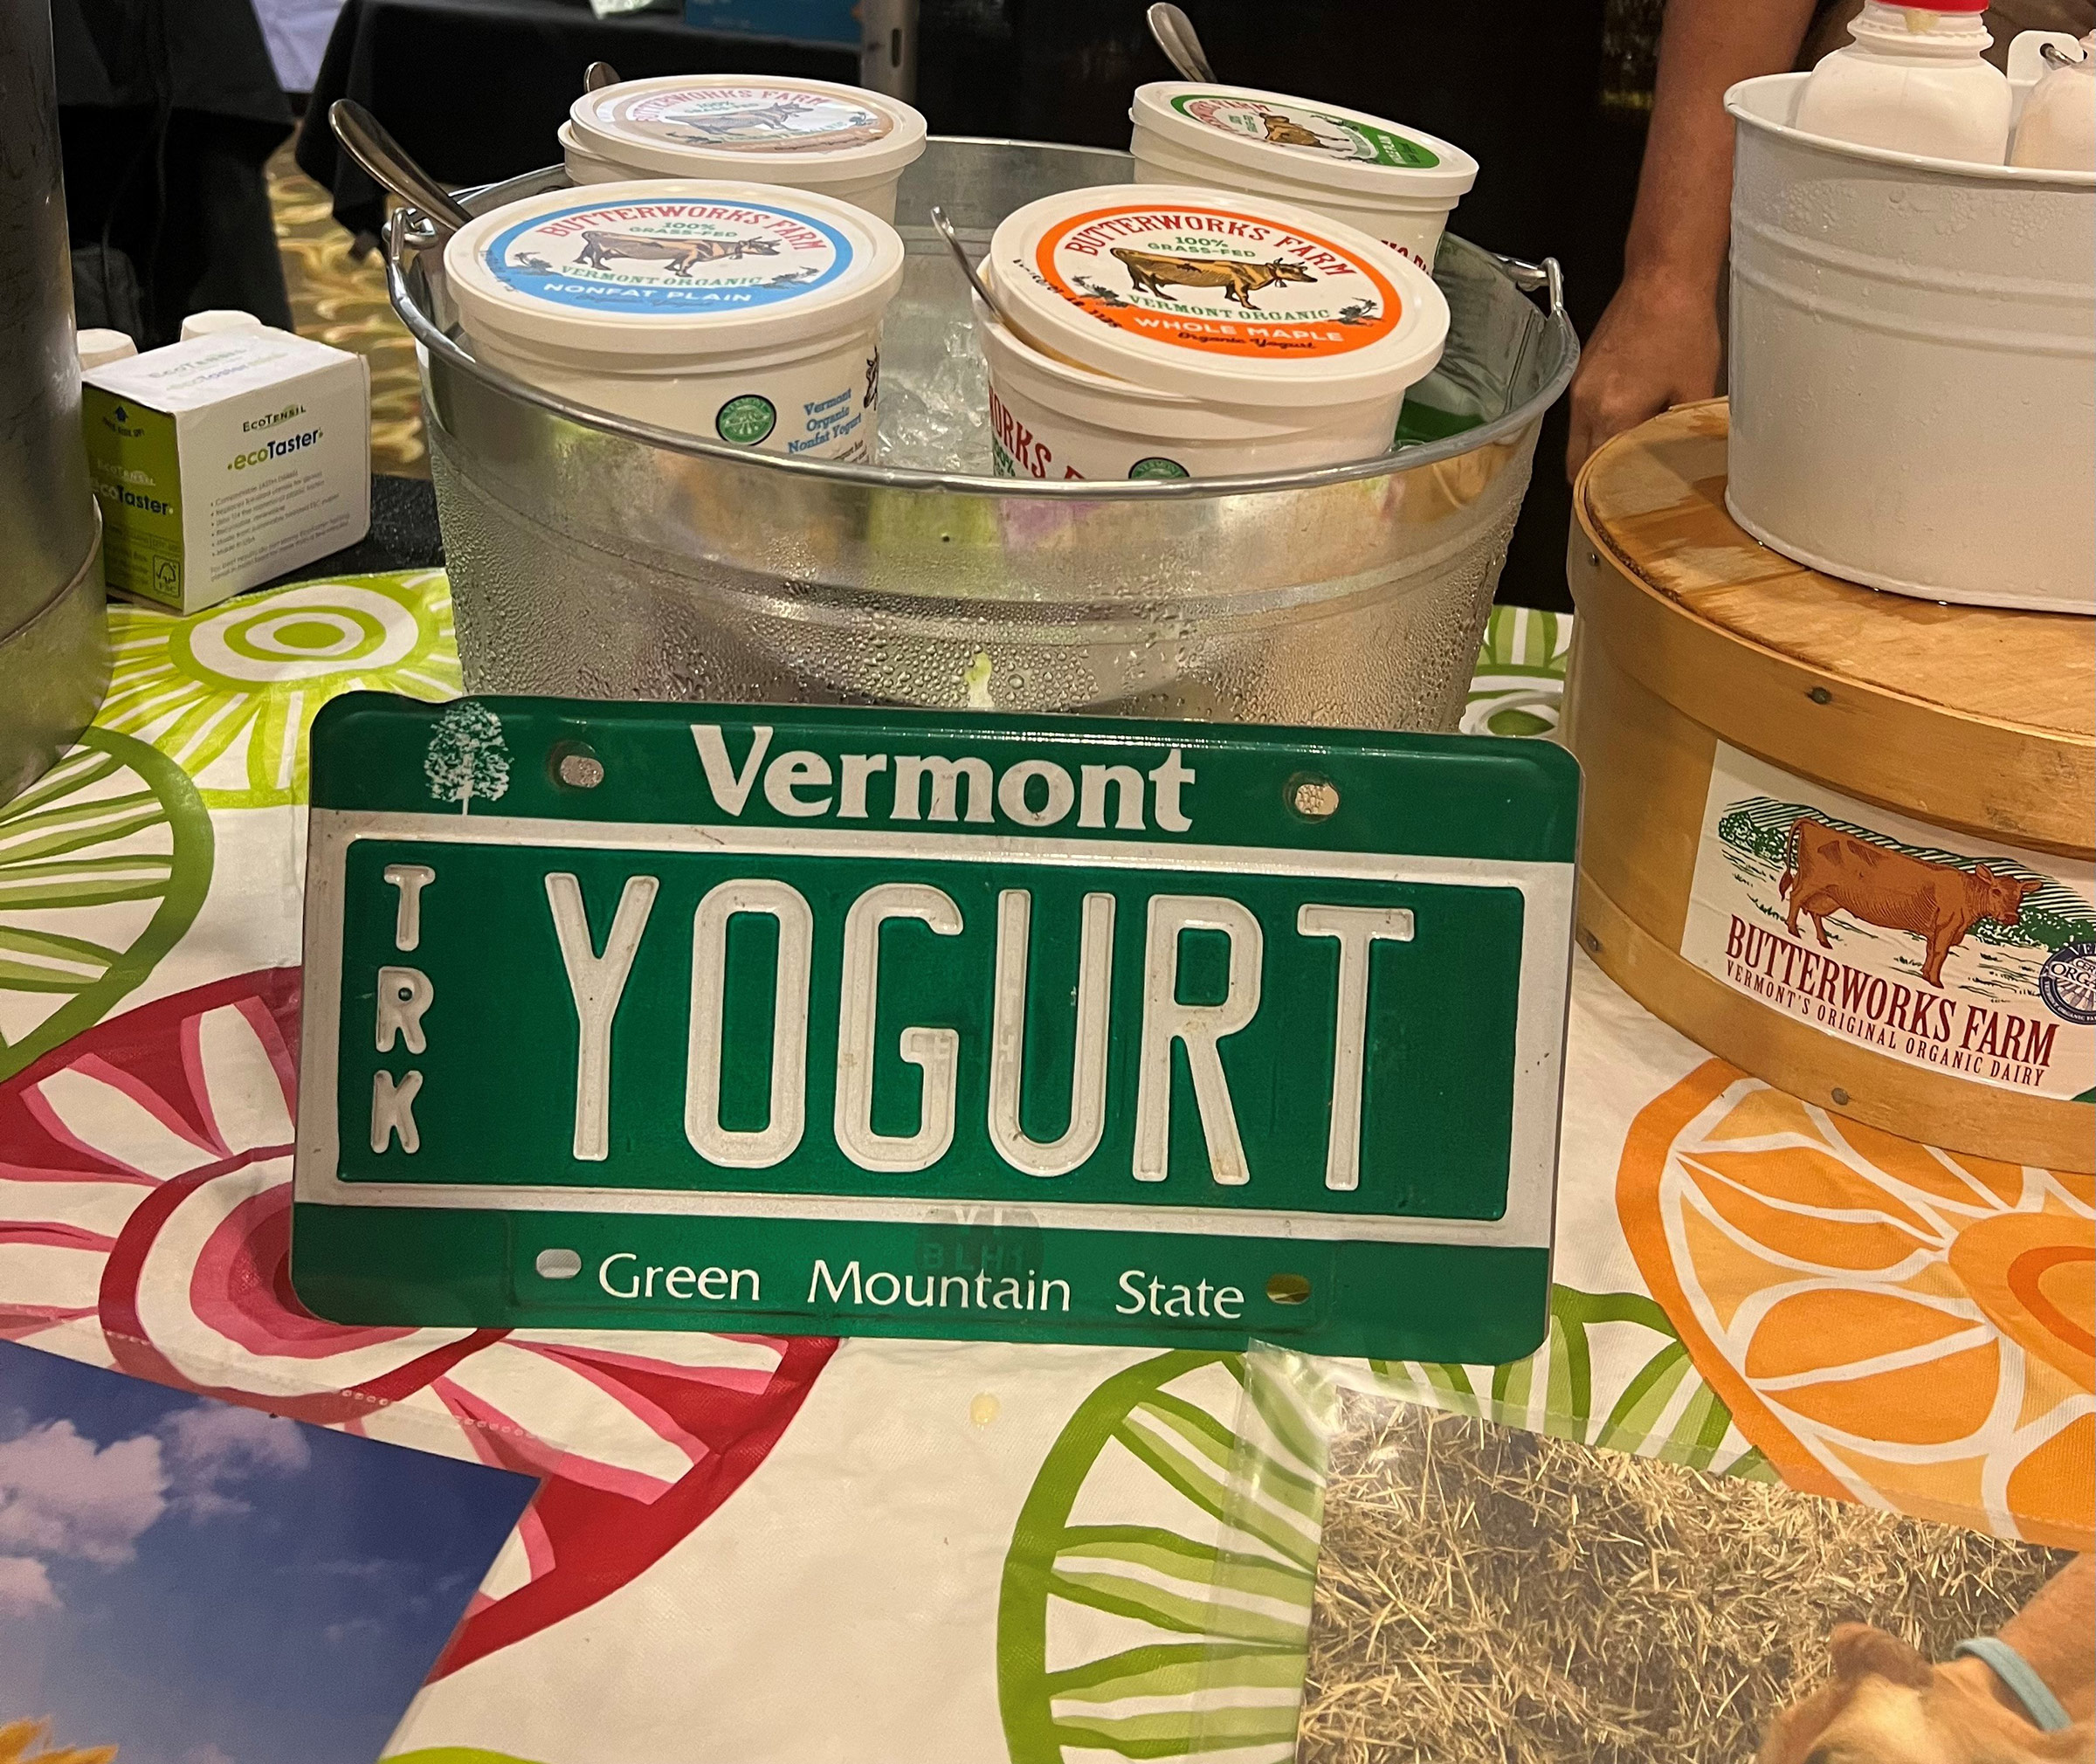 vermont license plate yogurt from butterworks farm exhibit at new england food show fresh expo 2023